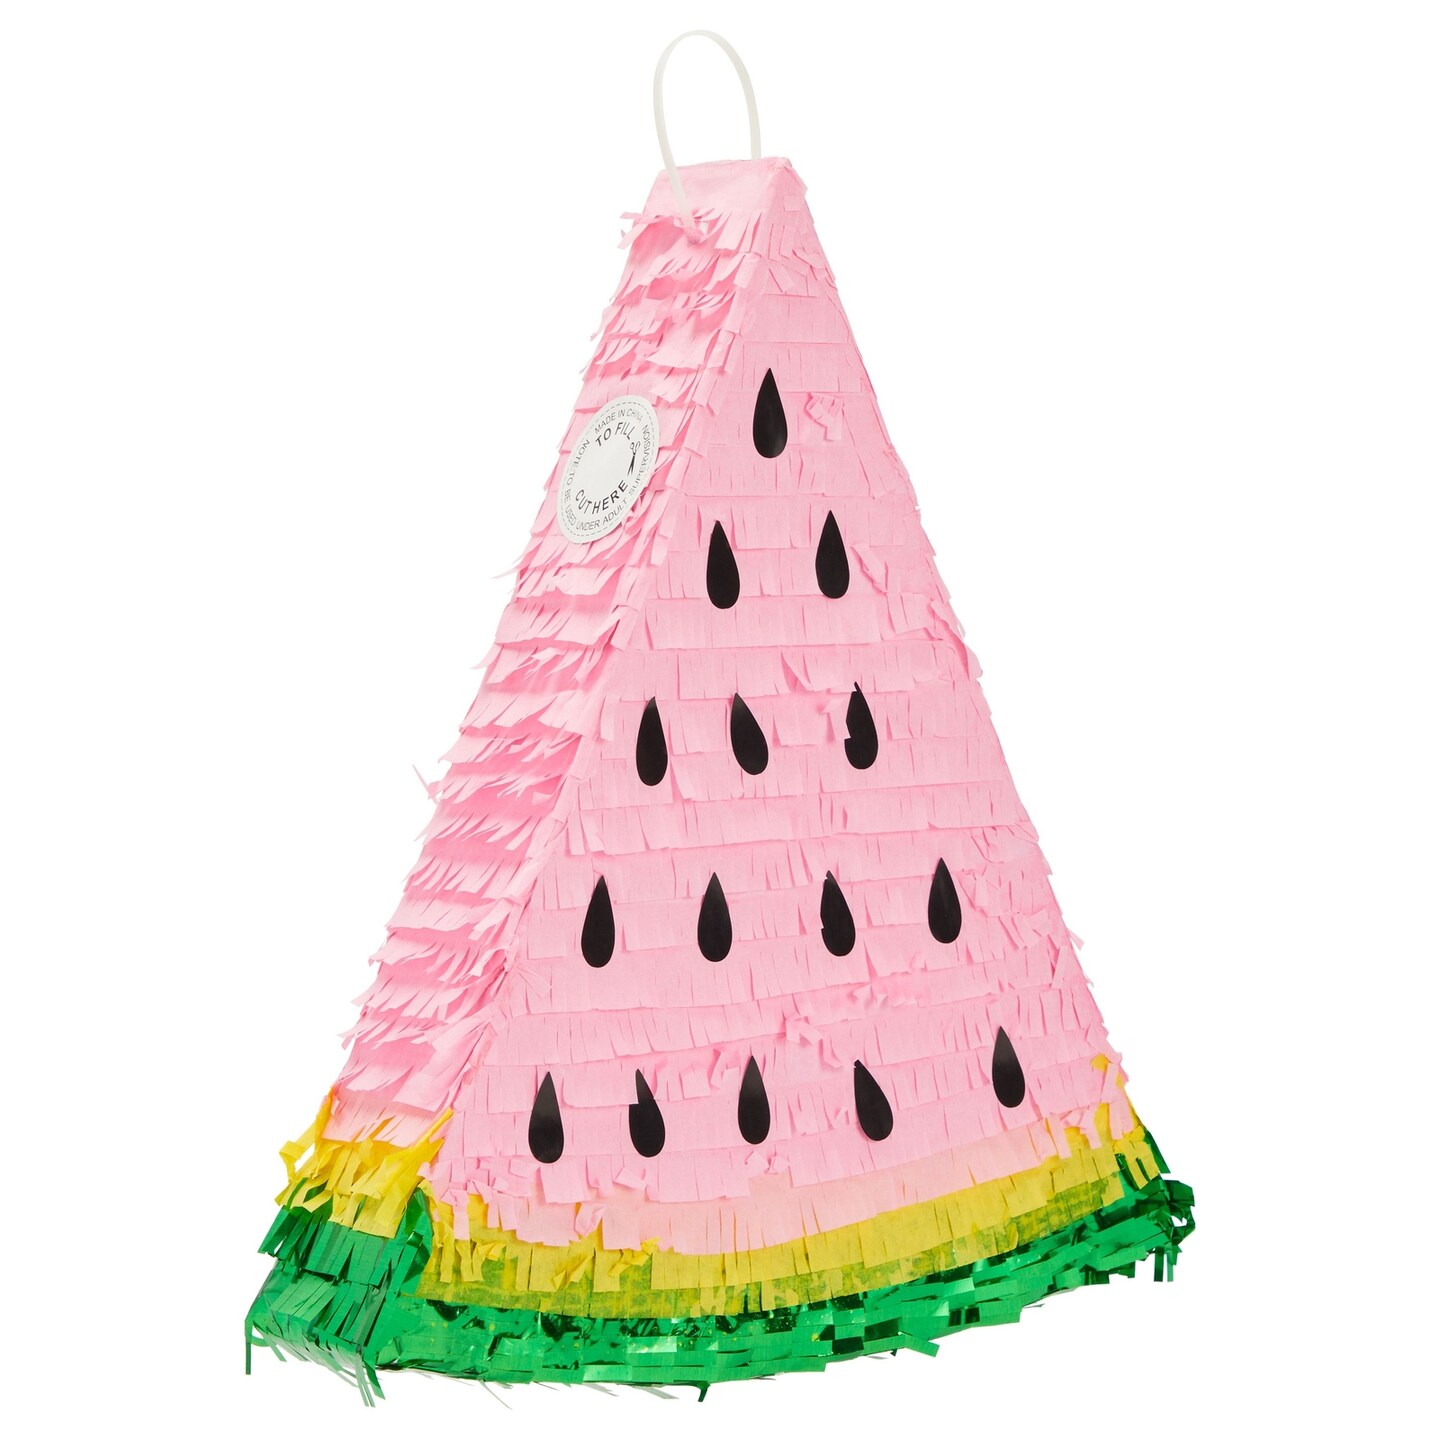 Watermelon Pinata for Kids Birthday, One in a Melon Party Decorations for Summer, Baby Shower Centerpieces for Girls and Boys, Fruit Theme (Small, 17x14.5x3 Inches)